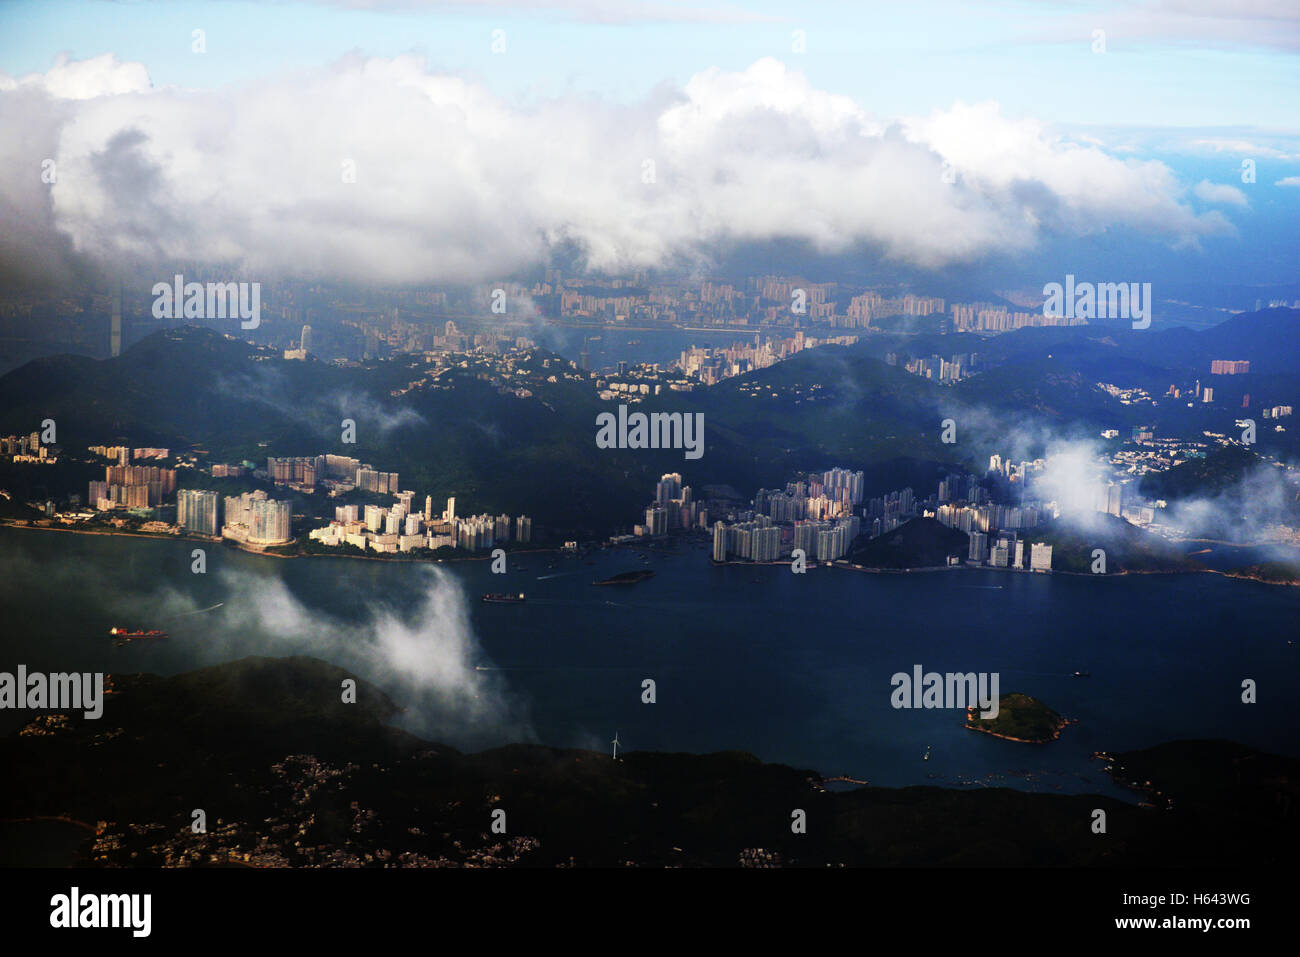 An aerial view of Hong Kong Island's 'South side' with Kowloon in the background. Stock Photo